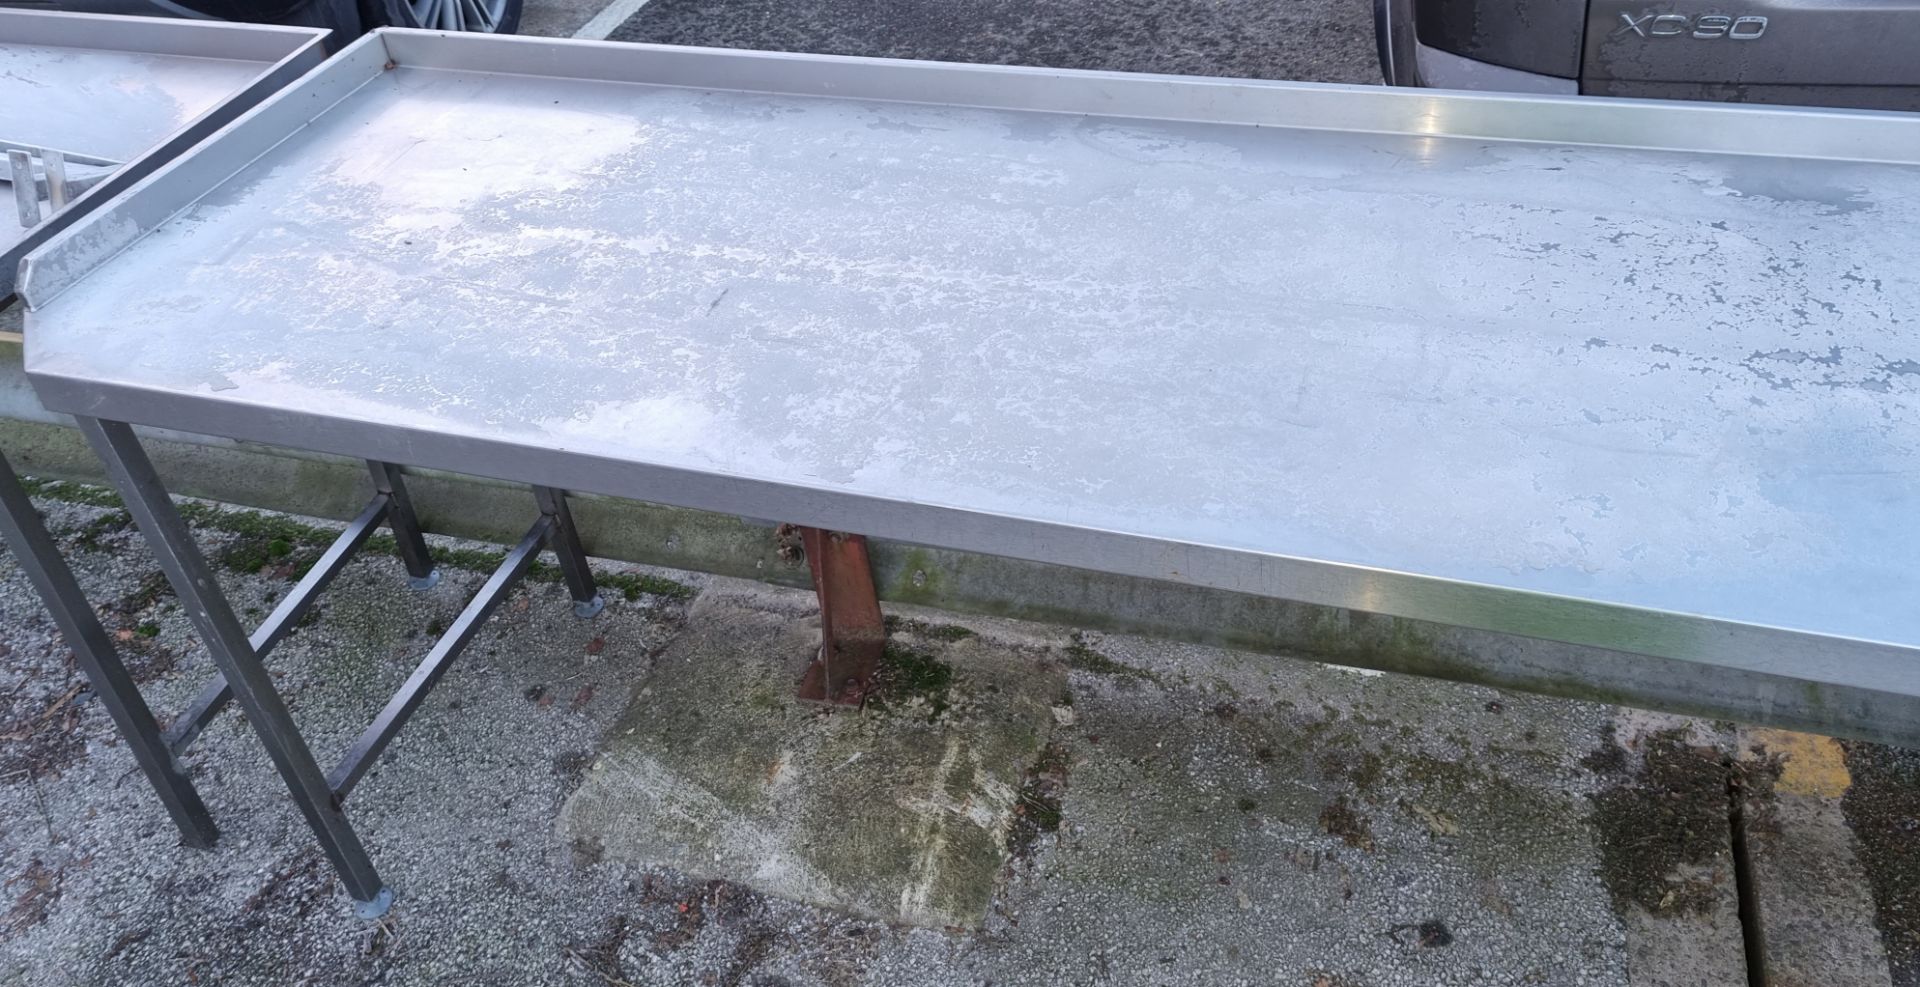 Stainless steel large prep table - L2600 x D750 x H940mm - Image 3 of 3